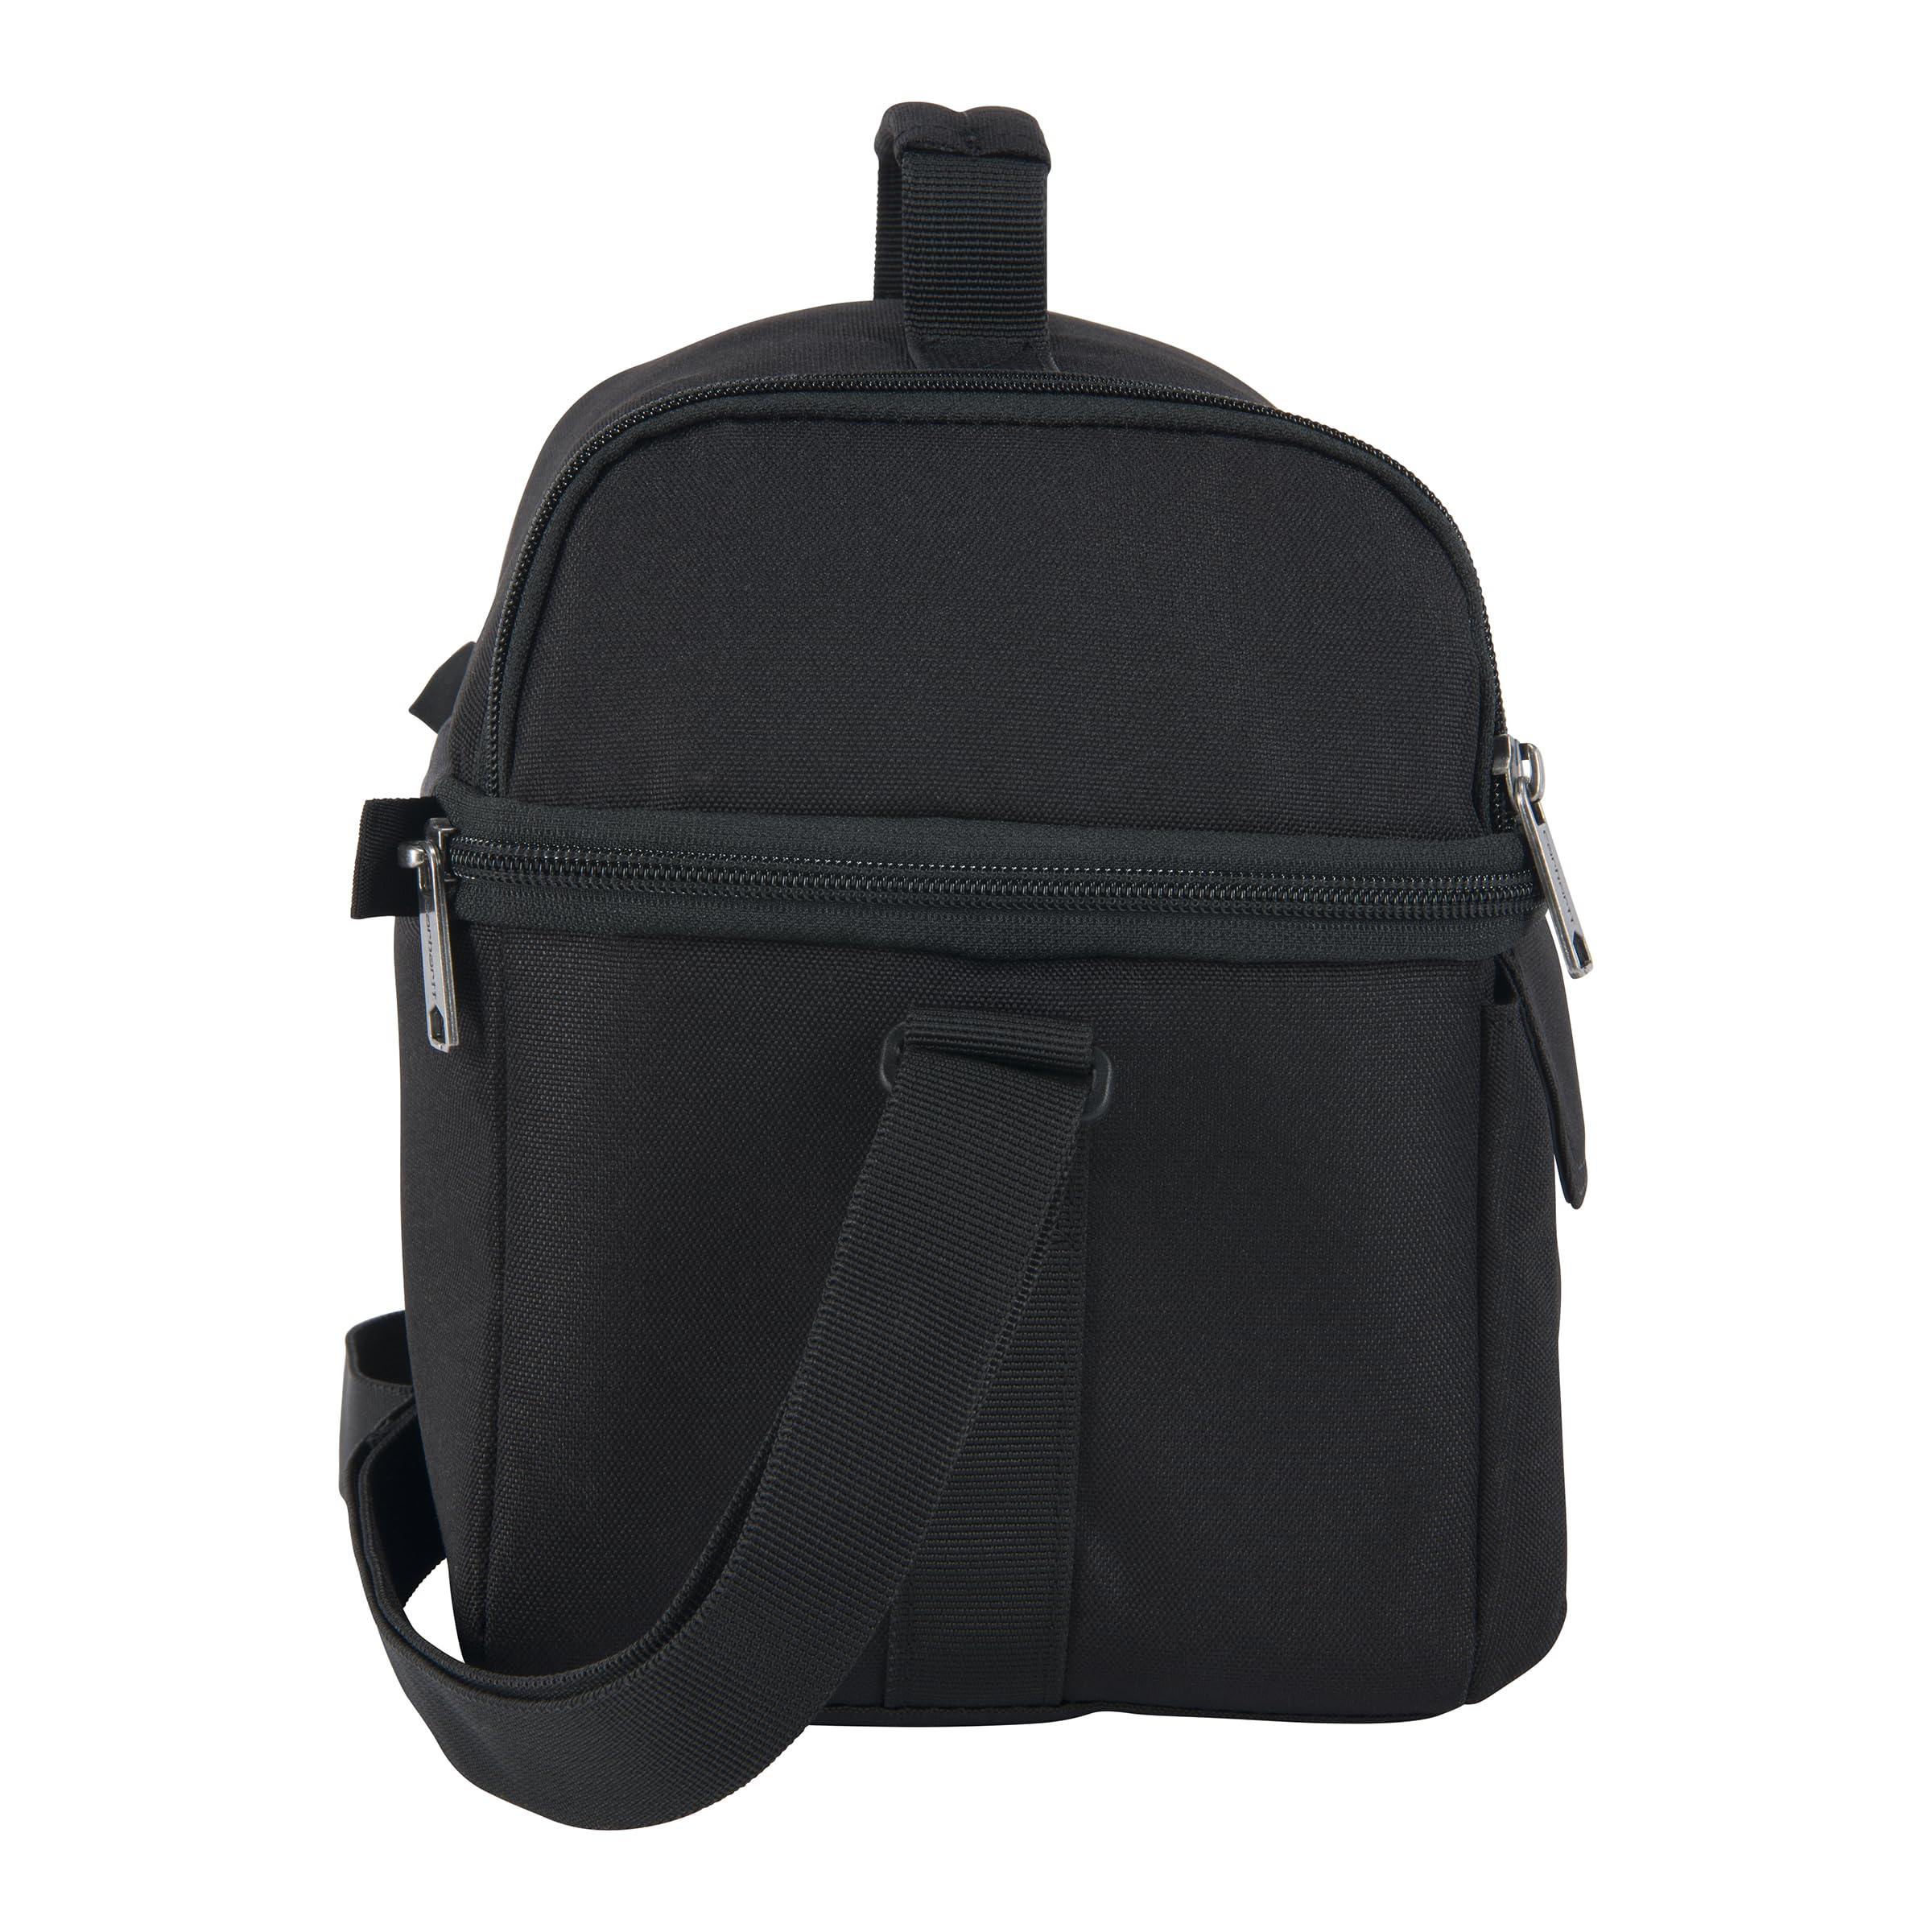 Compartment Insulated Lunch Cooler Bag Wholesale Product Details